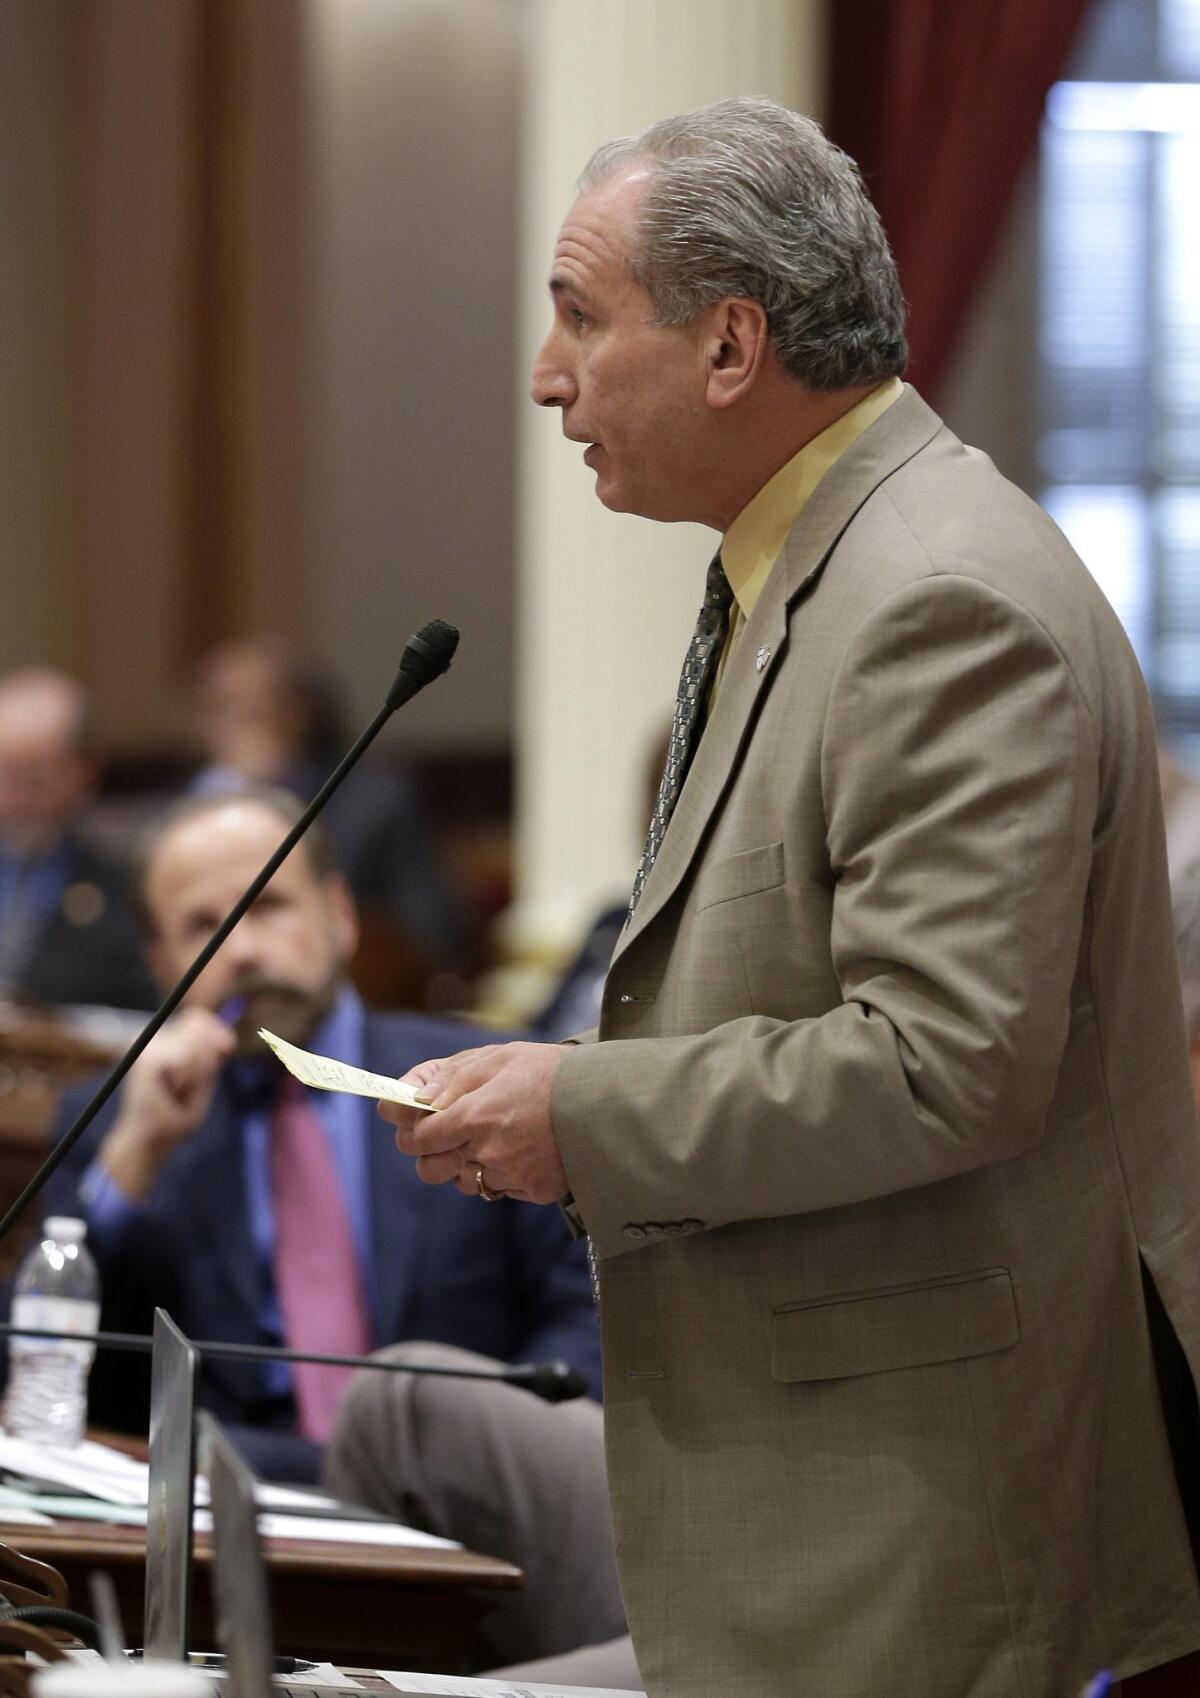 State Sen. Jeff Stone (R-Temecula) speaking at the Capitol this month. Stone's resolution condeming anti-Semitism on California college campuses was approved by an Assembly panel on Tuesday.